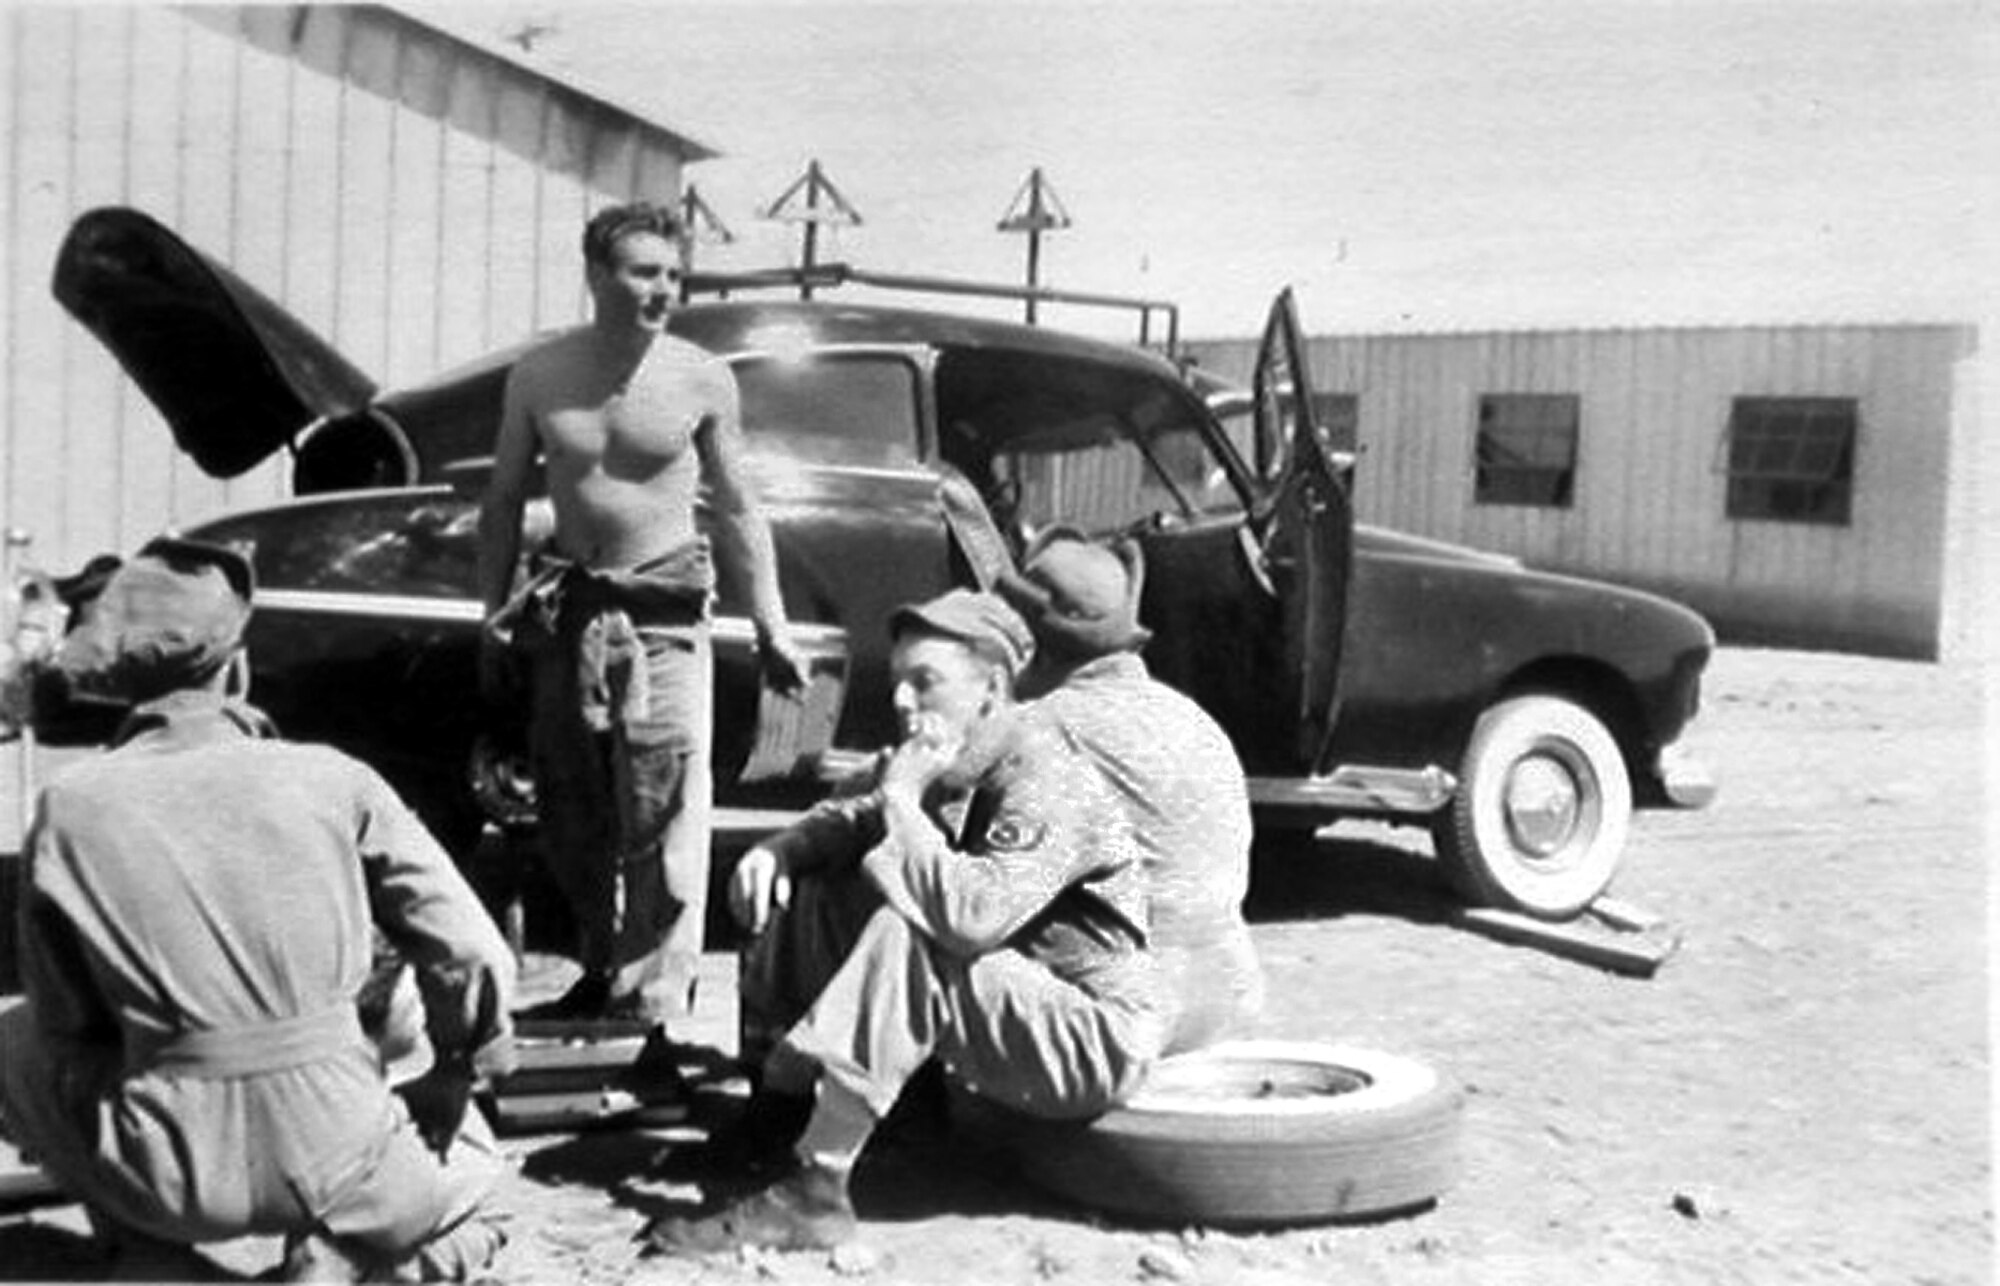 Airmen perform maintenance on a personally owned vehicle circa 1950's. (Photo courtesy of the Malmstrom Museum)